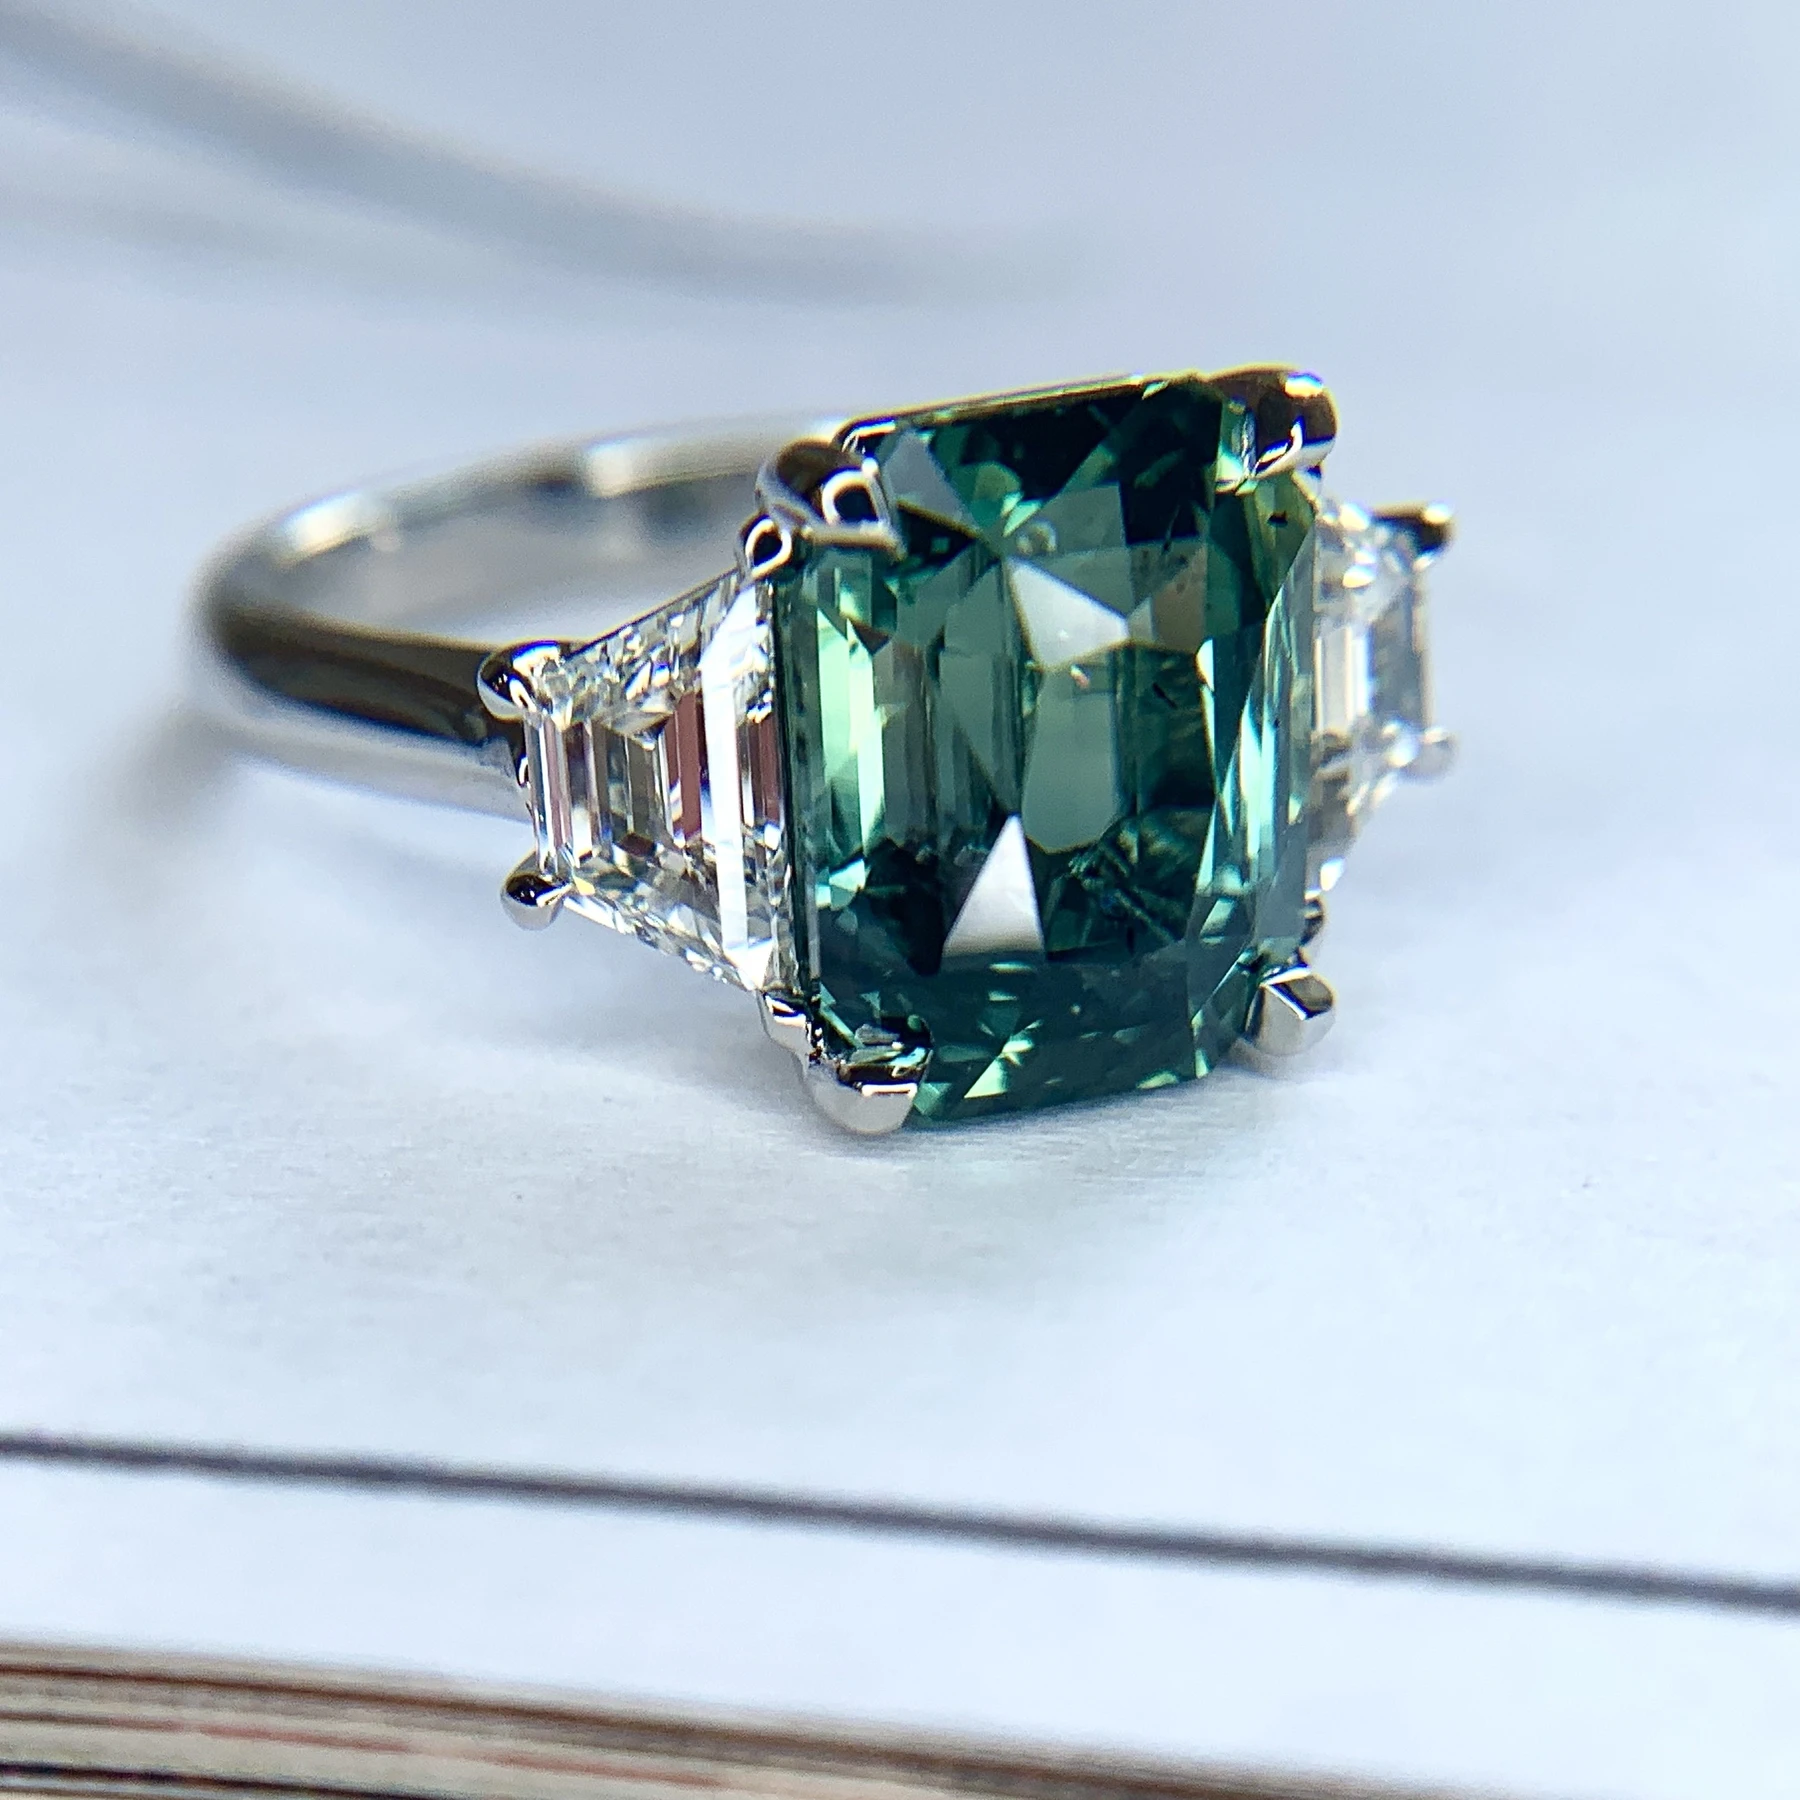 Green sapphire emerald cut engagement ring with diamond accents